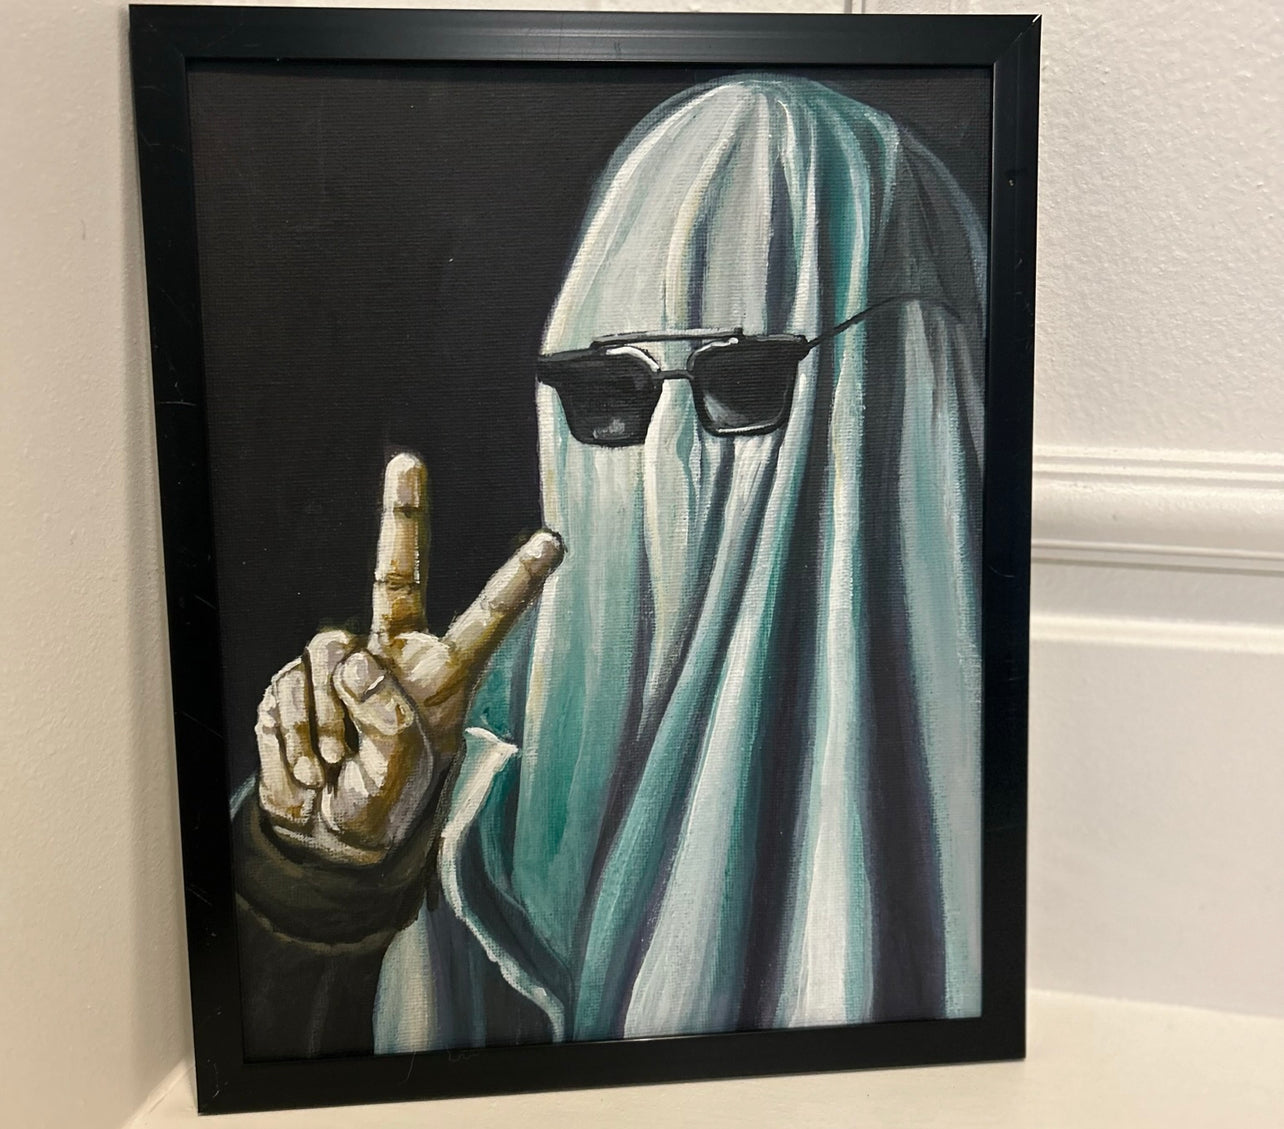 Ghastly Groove:  Painting a Peaceful Sheet Ghost in Shades